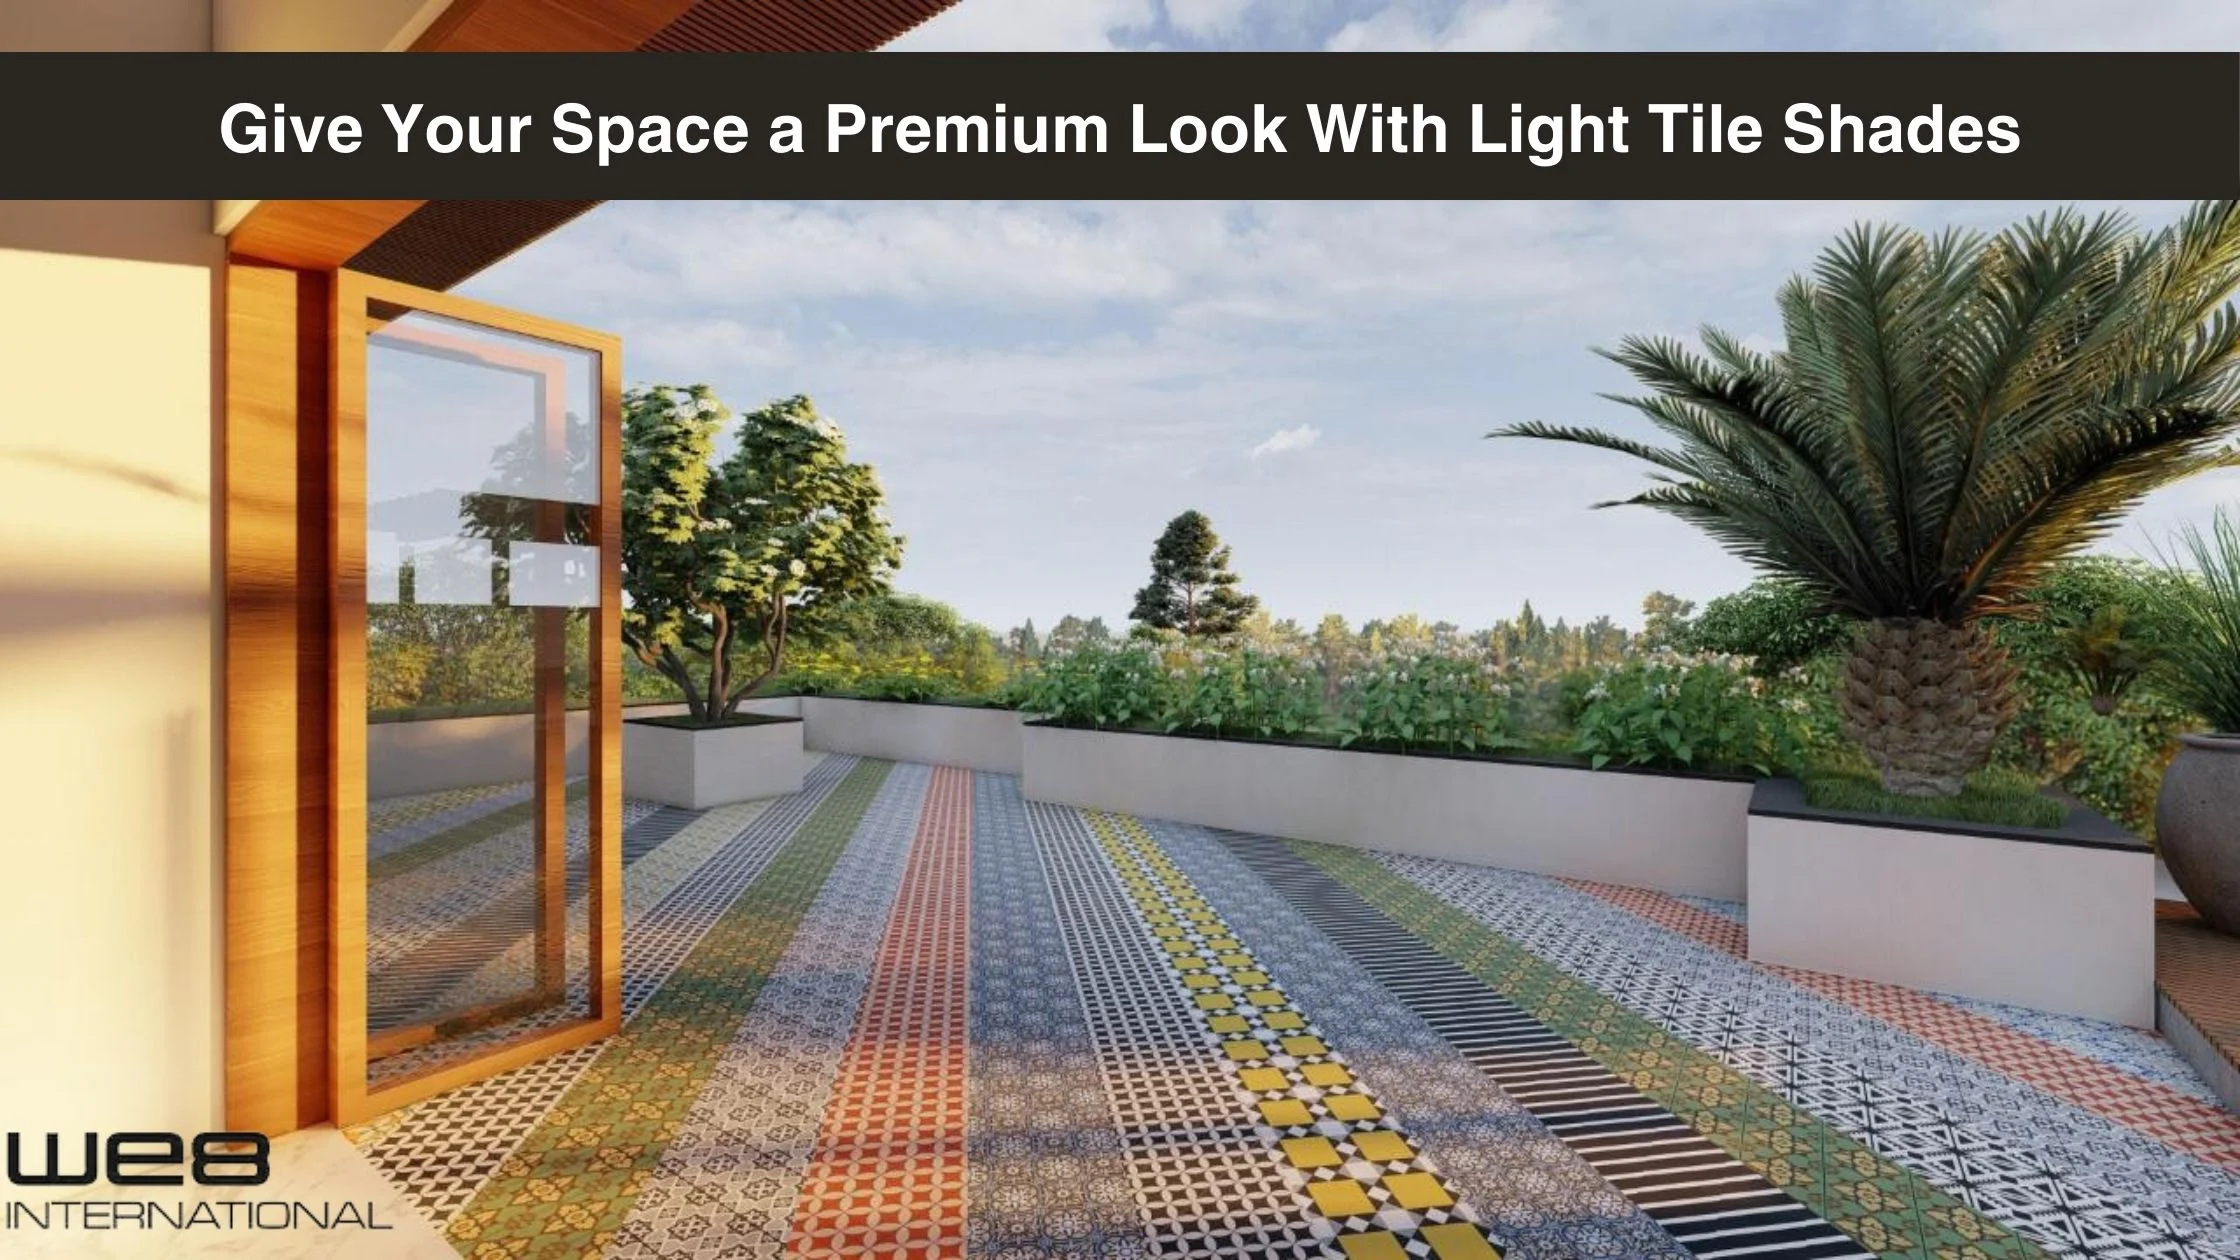 Give Your Space a Premium Look With Light Tile Shades